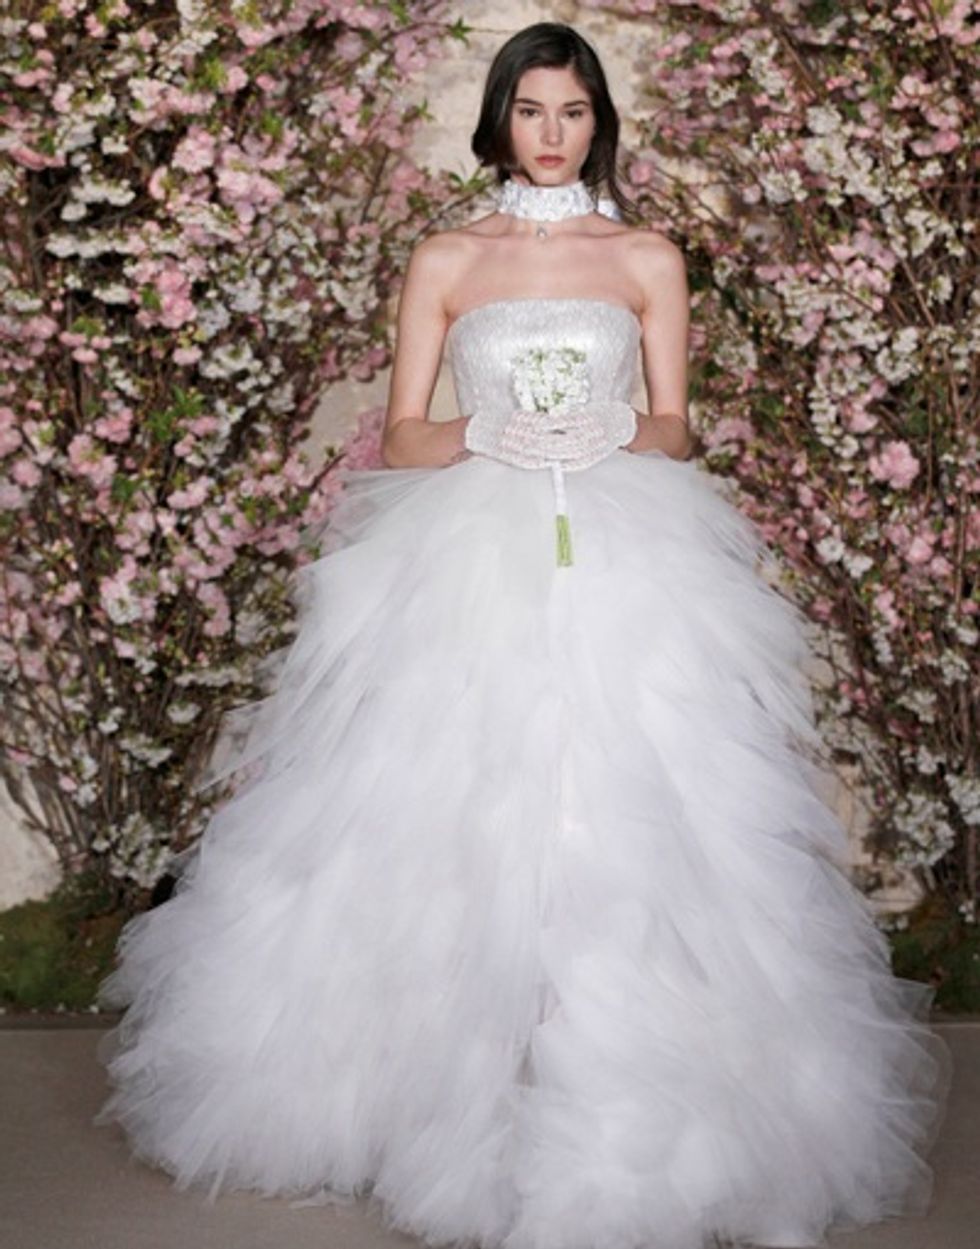 Bridal Boutique: The Bay Area’s Hottest Wedding Dresses of the Season